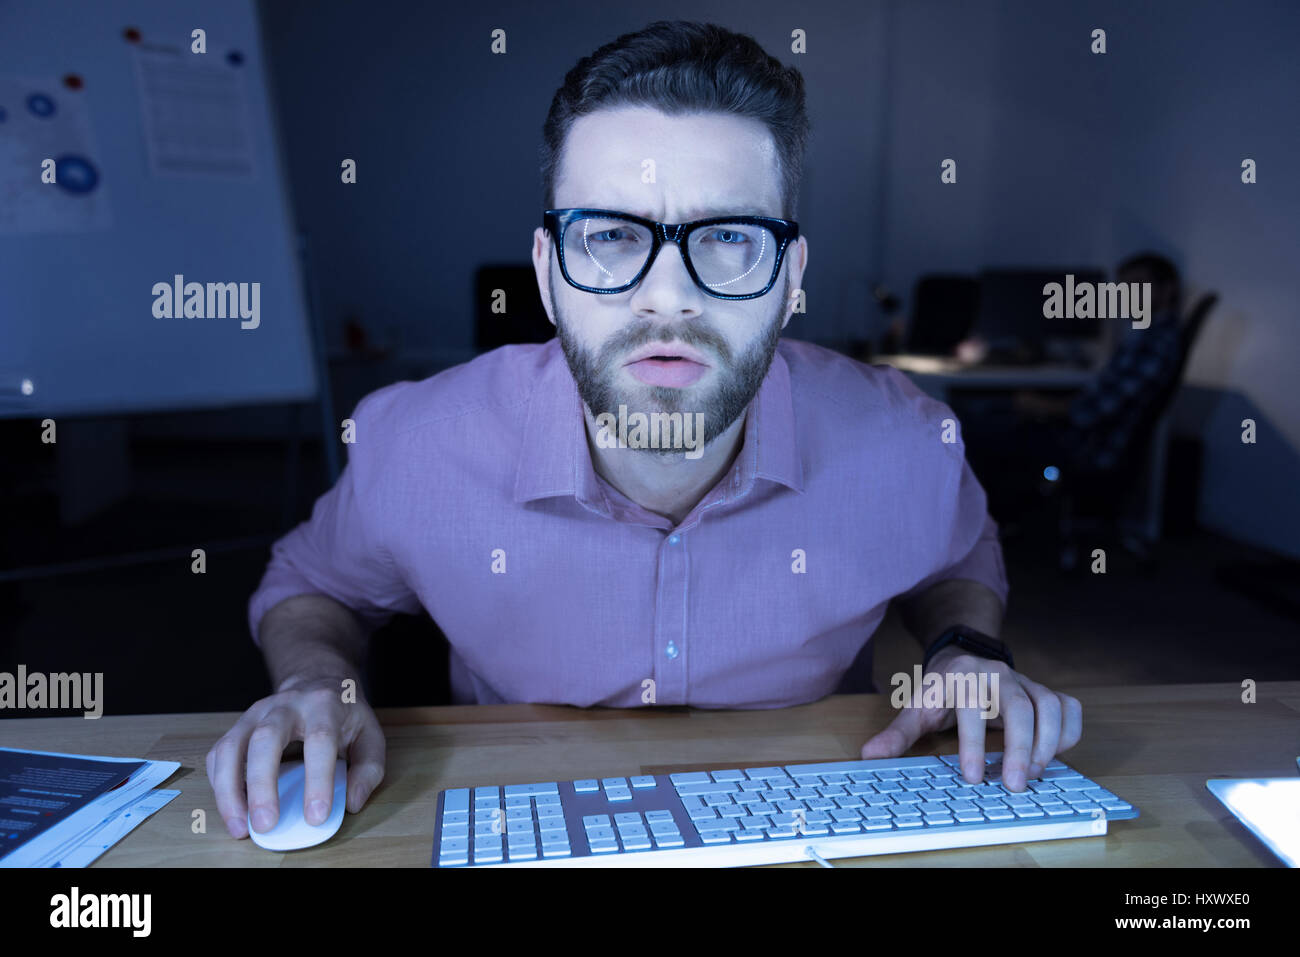 Serious hard working programmer looking at the screen Stock Photo